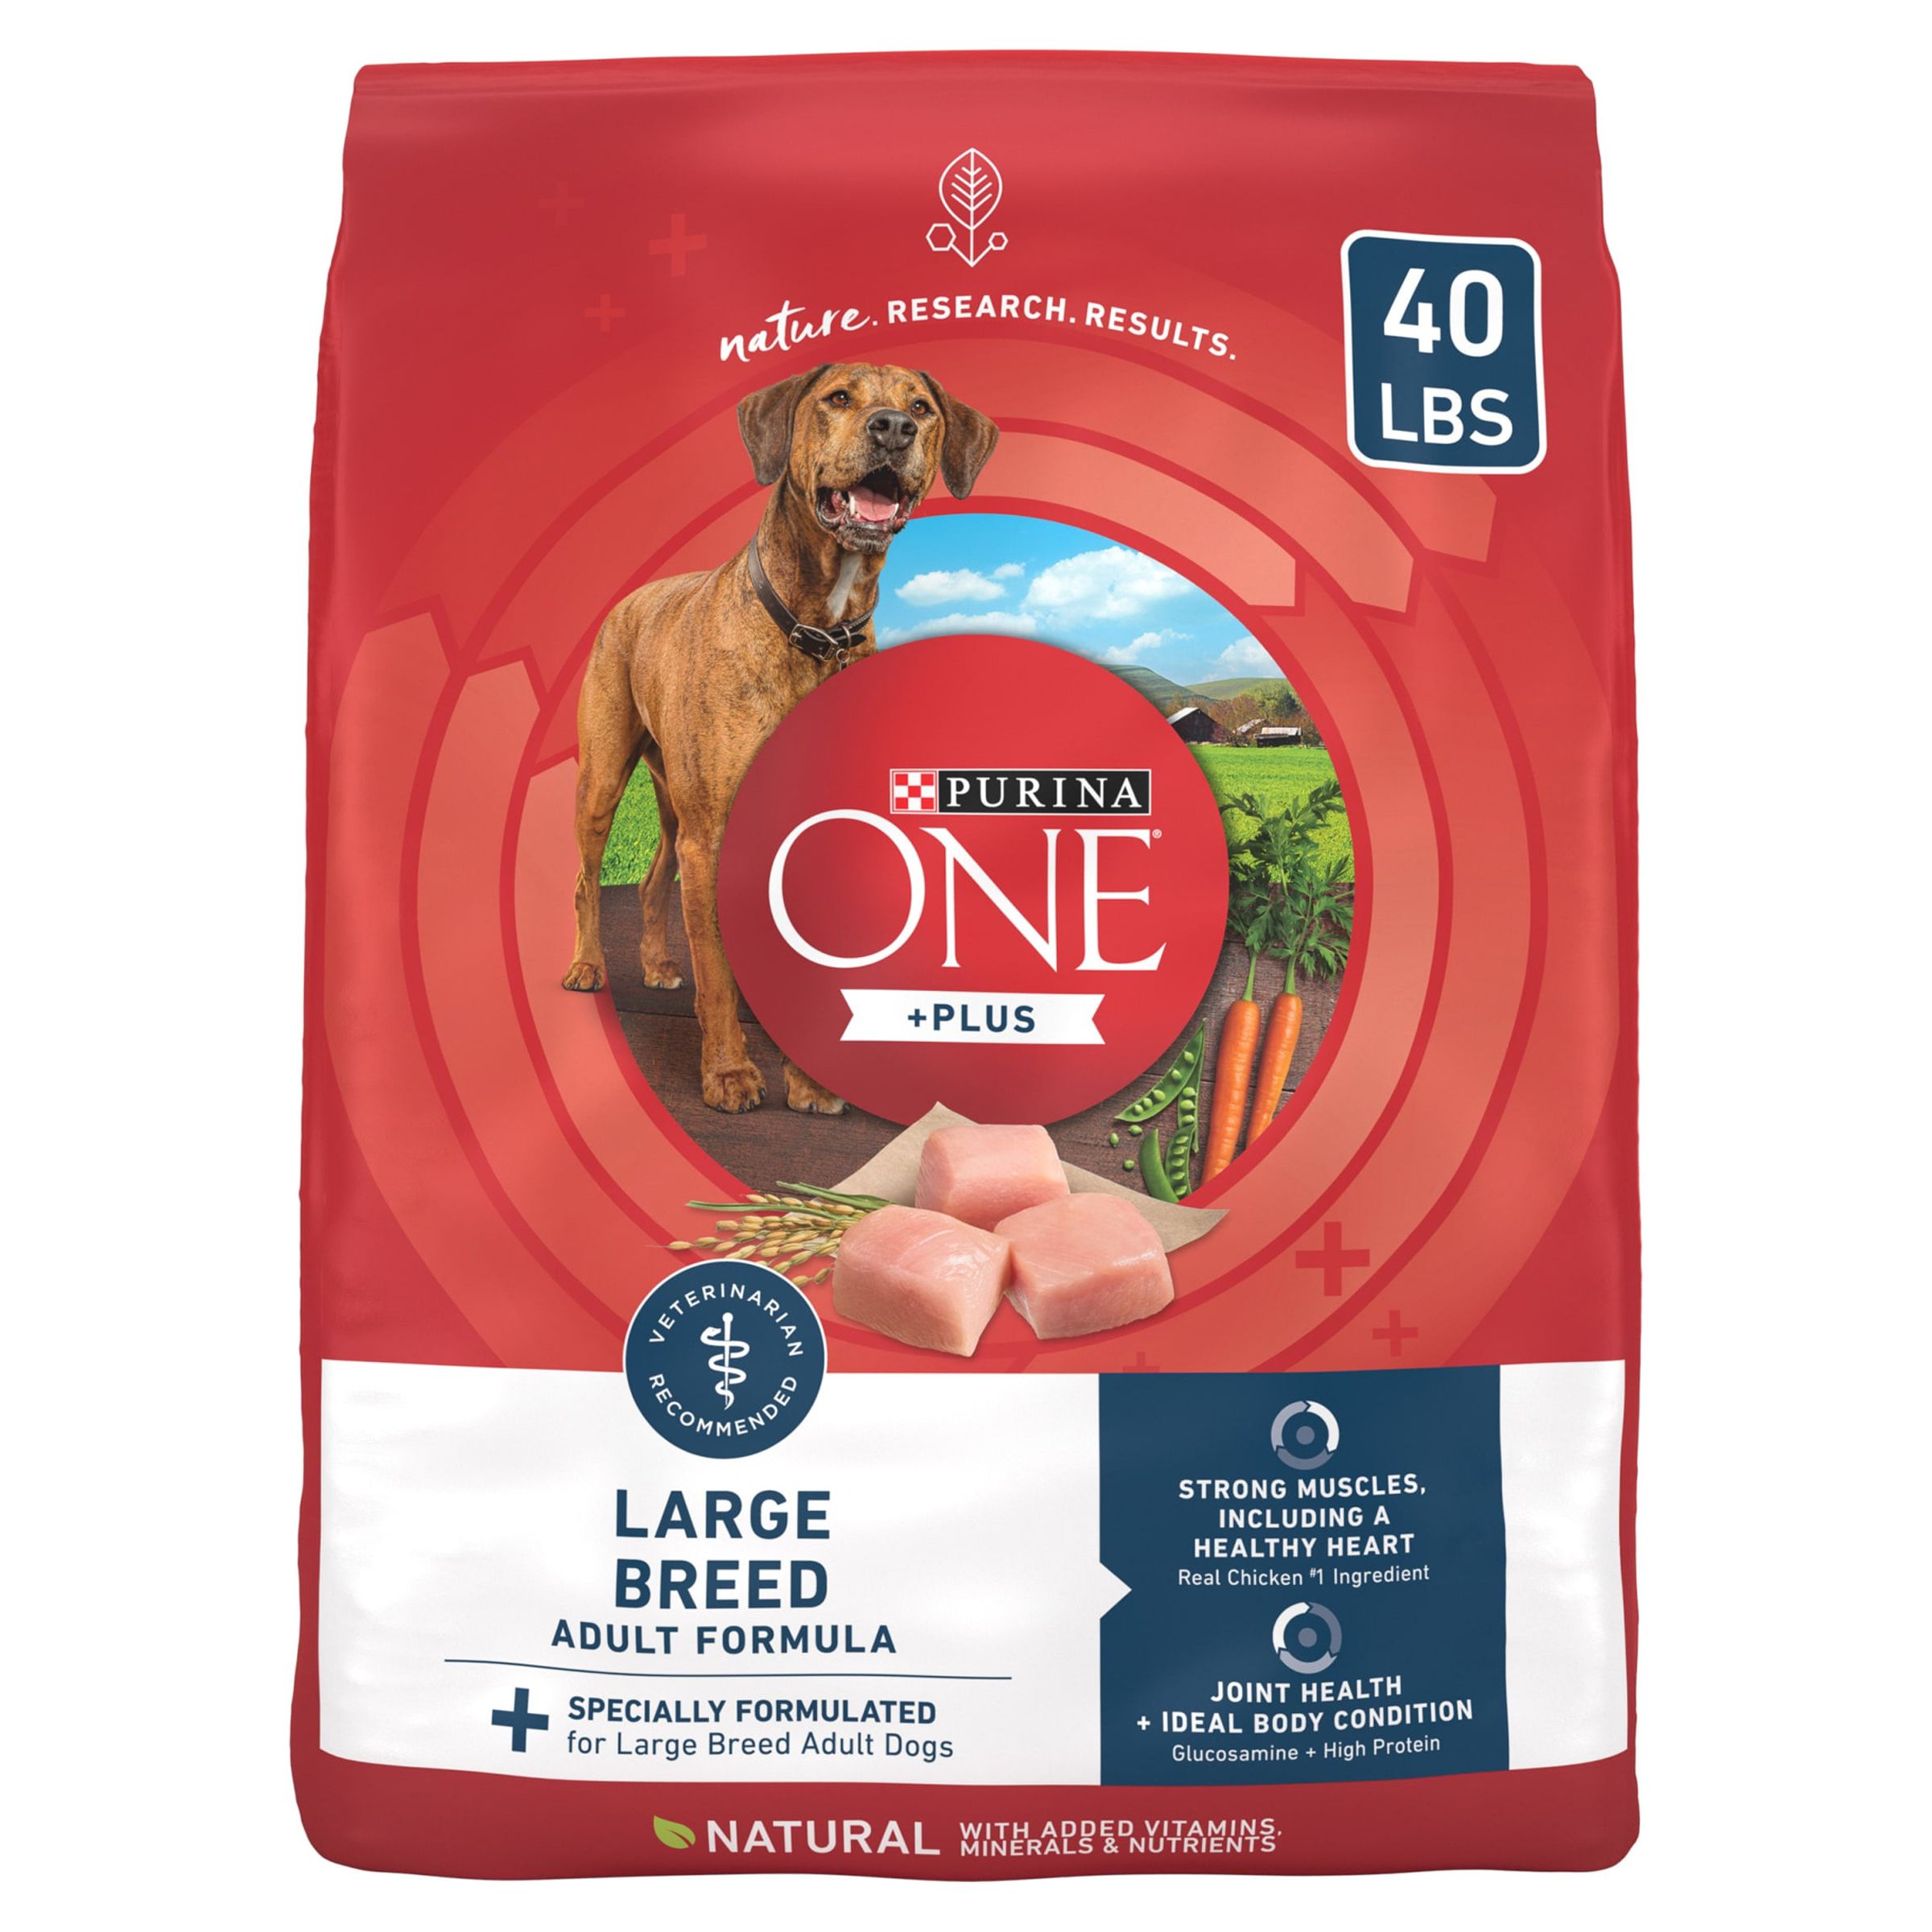 Purina ONE Plus Dry Large Breed Dog Food for Adult Dogs, Real Protein Rich Natural Chicken Flavor, 40lb Bag - image 1 of 11